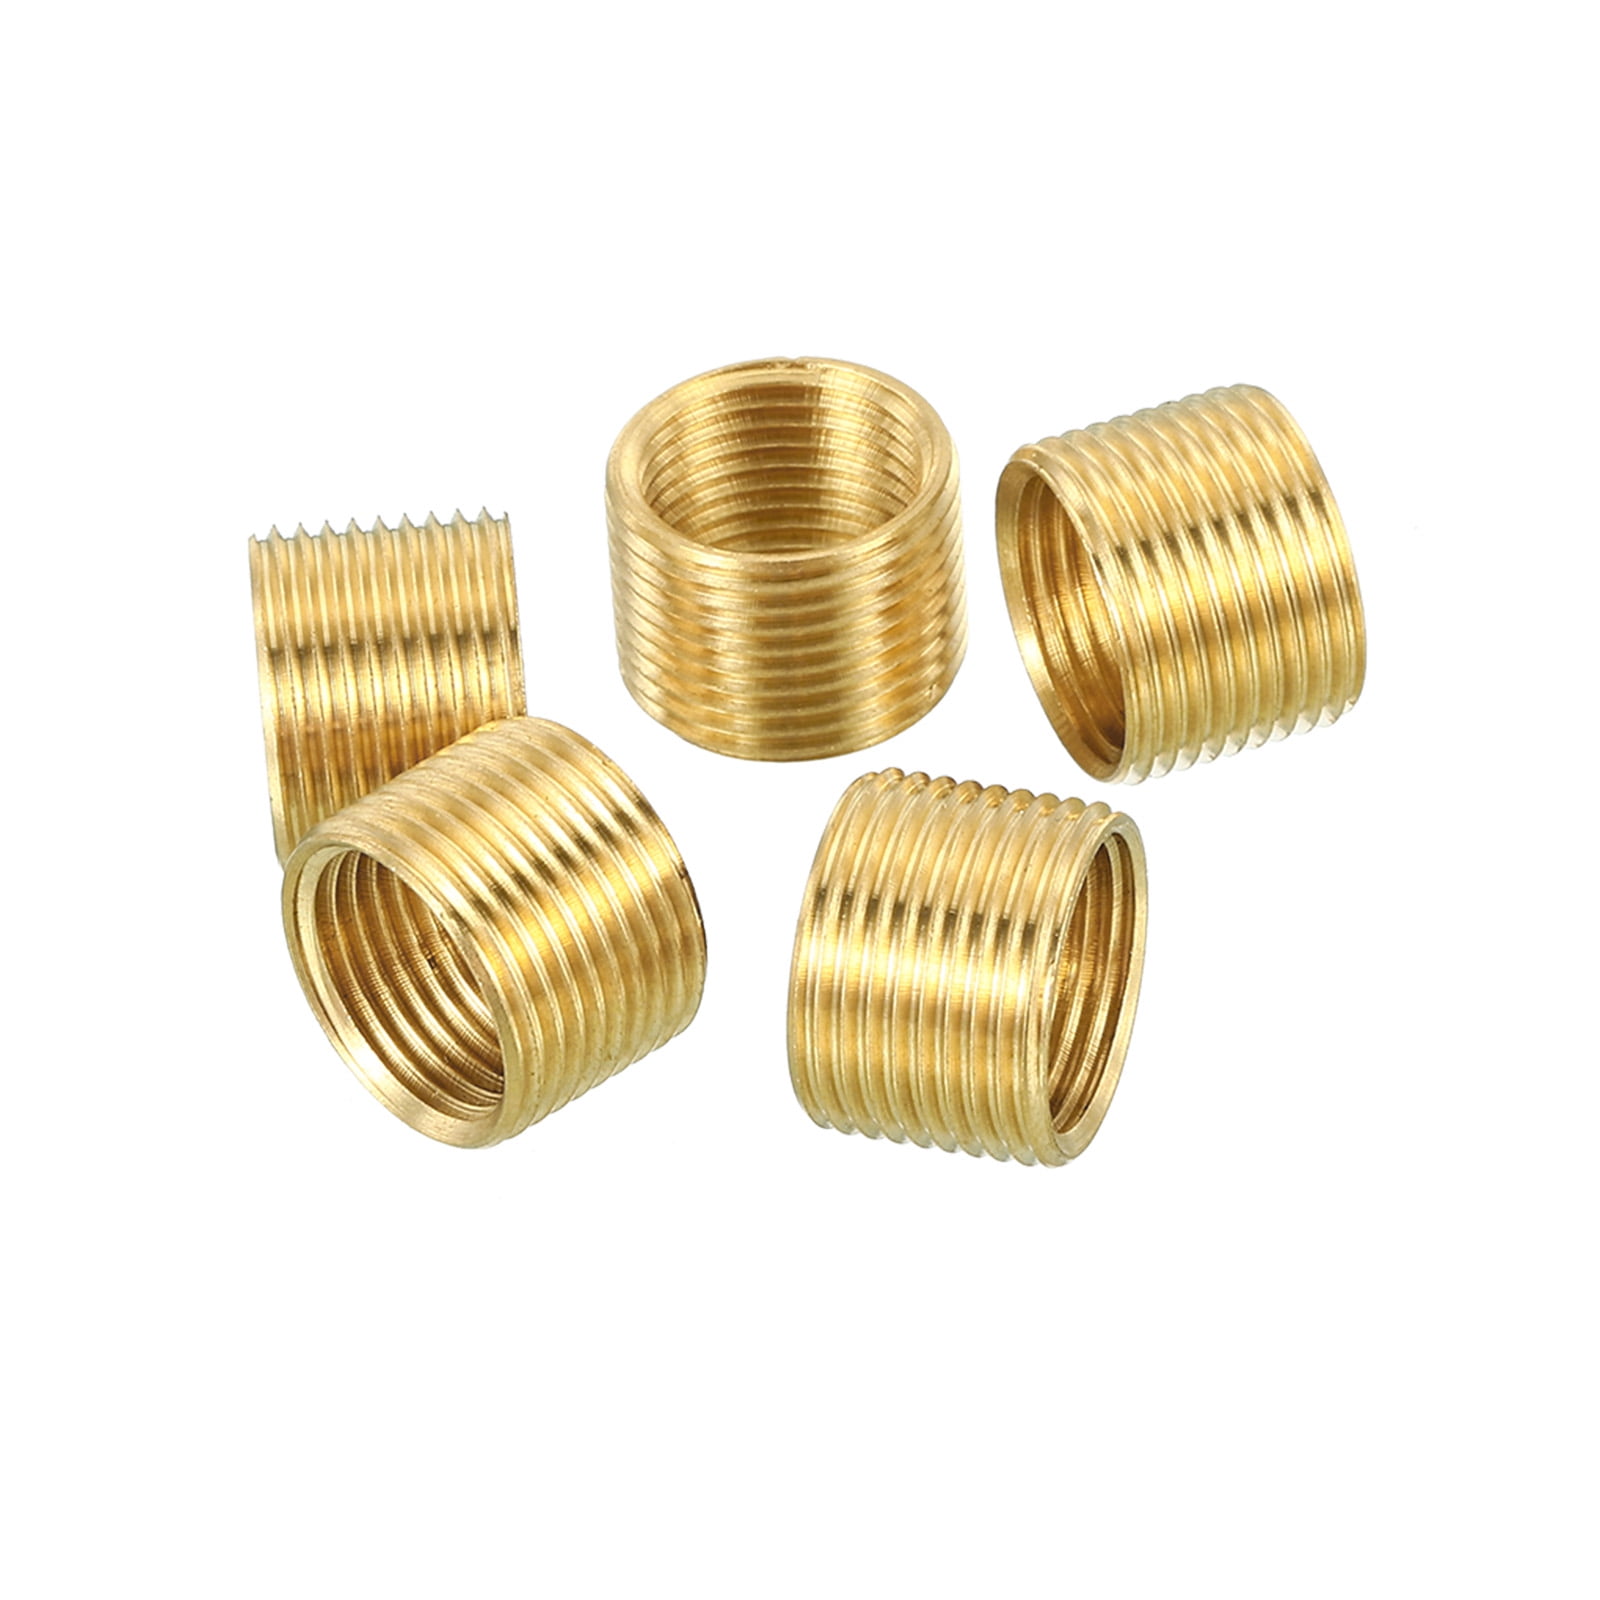 Uxcell M14 Male to M10 Female Adapter 10mm Long Sleeve Reducer Thread  Reducing Nut Insert 5 Pack 